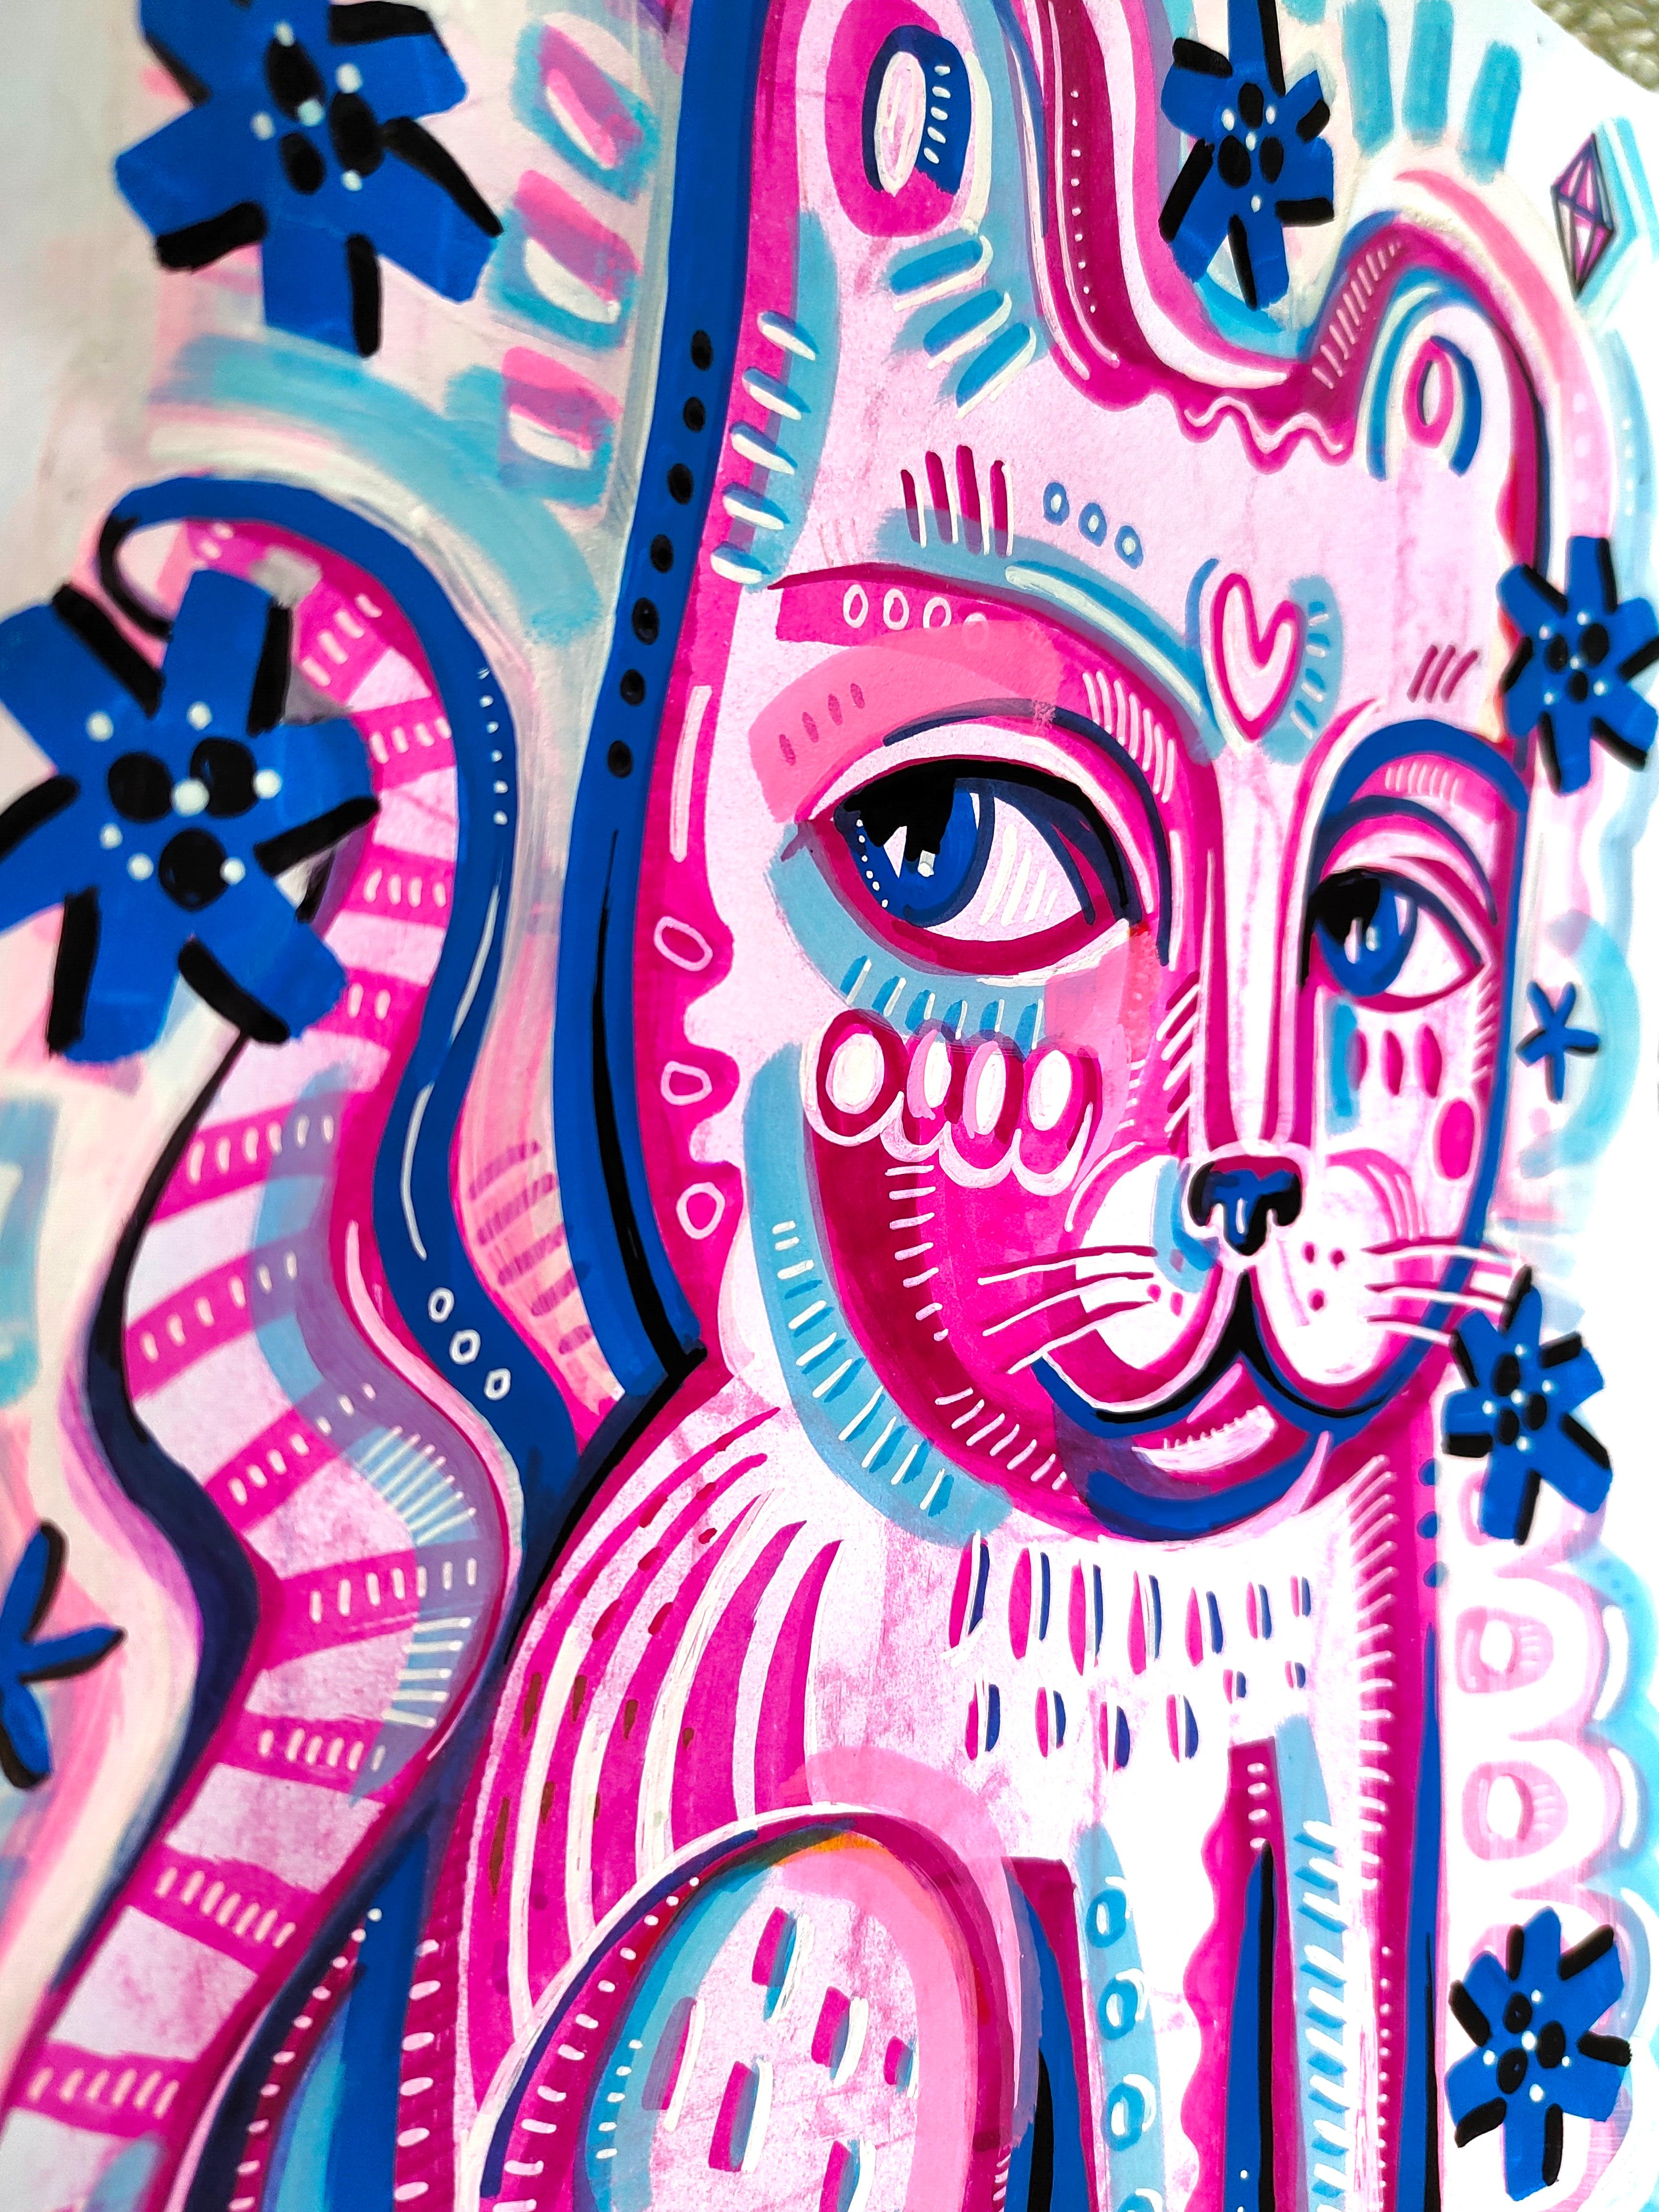 PINK PANTHER - Neo-Expressionist Painting by Daria Kusto